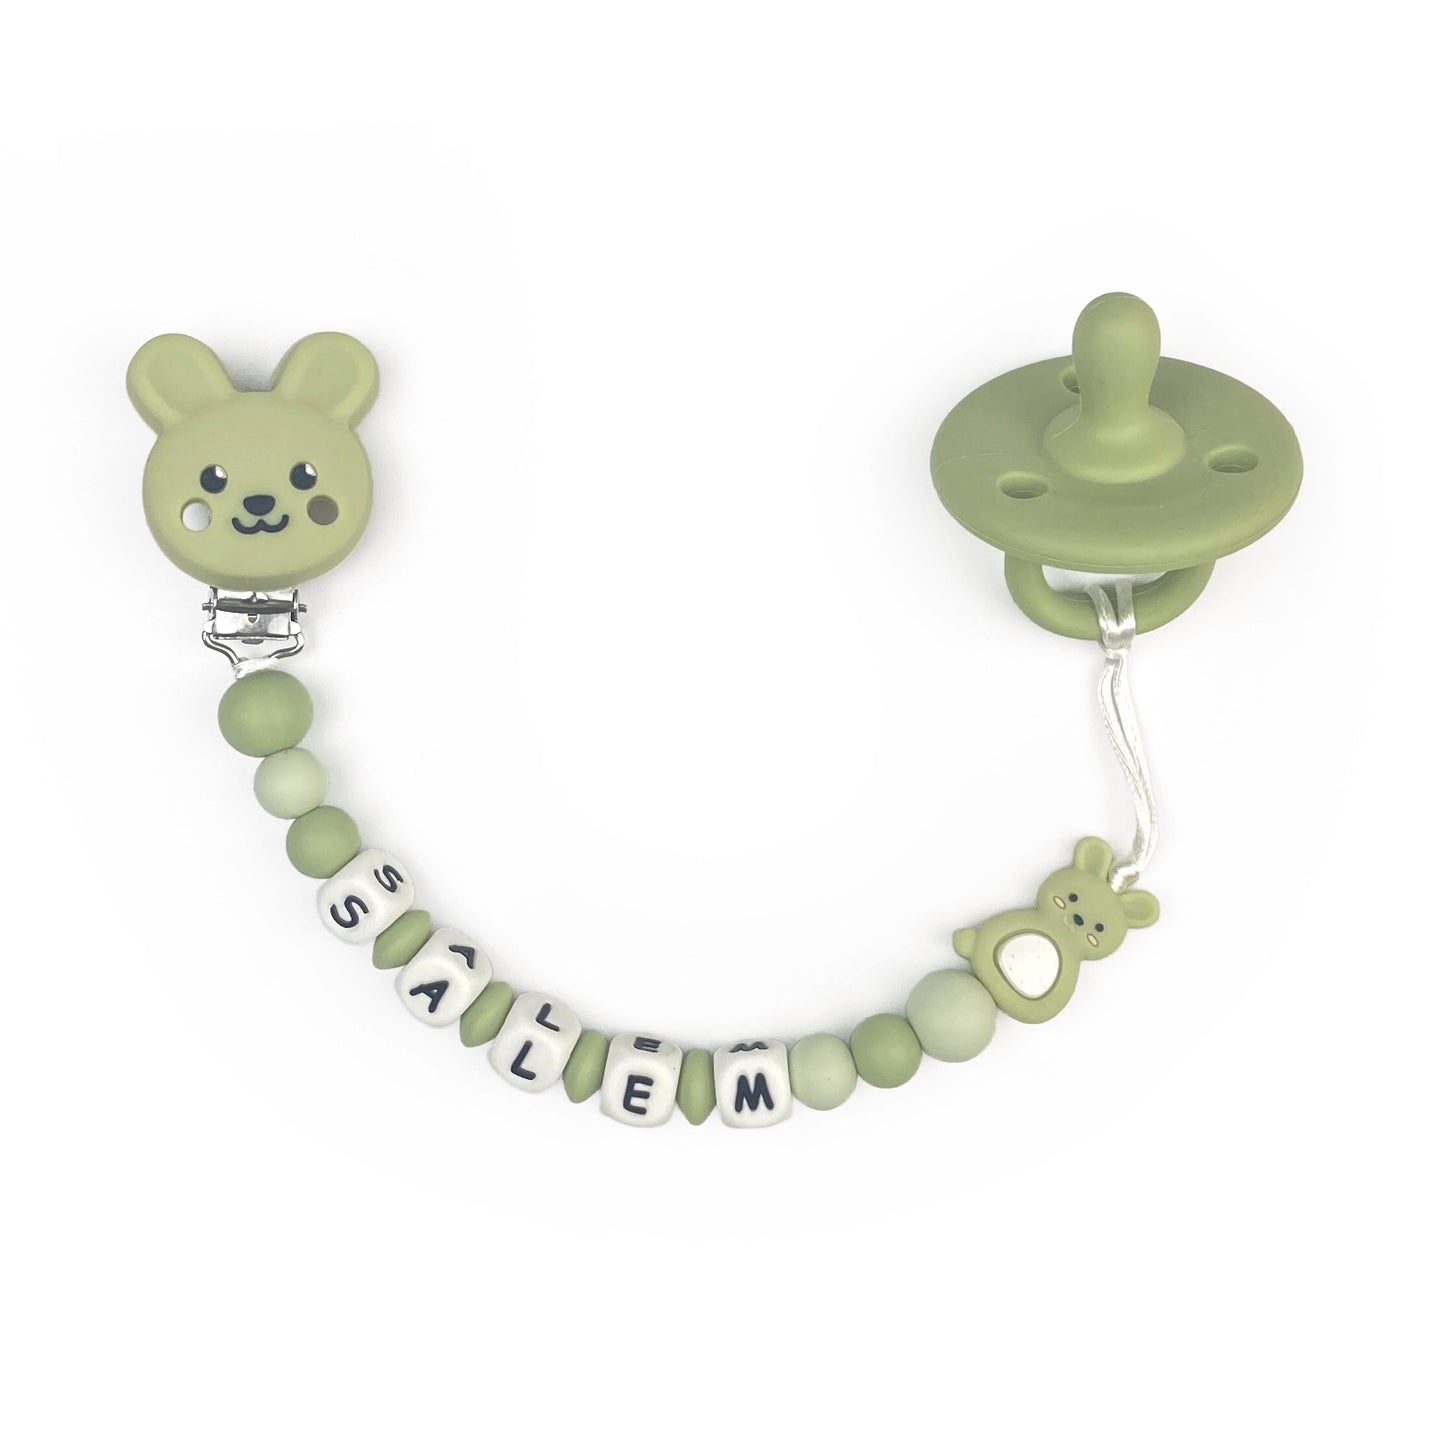 Bunny Chain with Pacifier